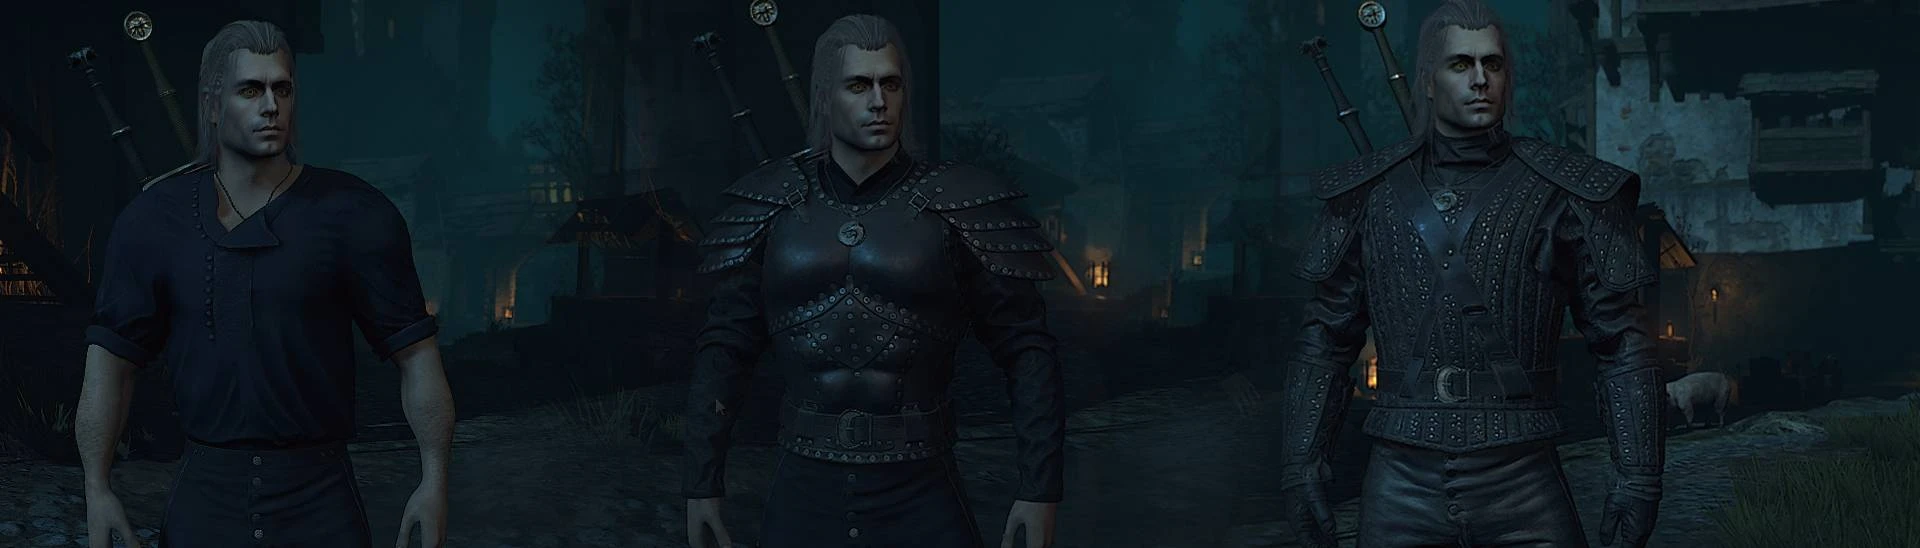 The Witcher Overhaul Project at The Witcher Nexus - mods and community